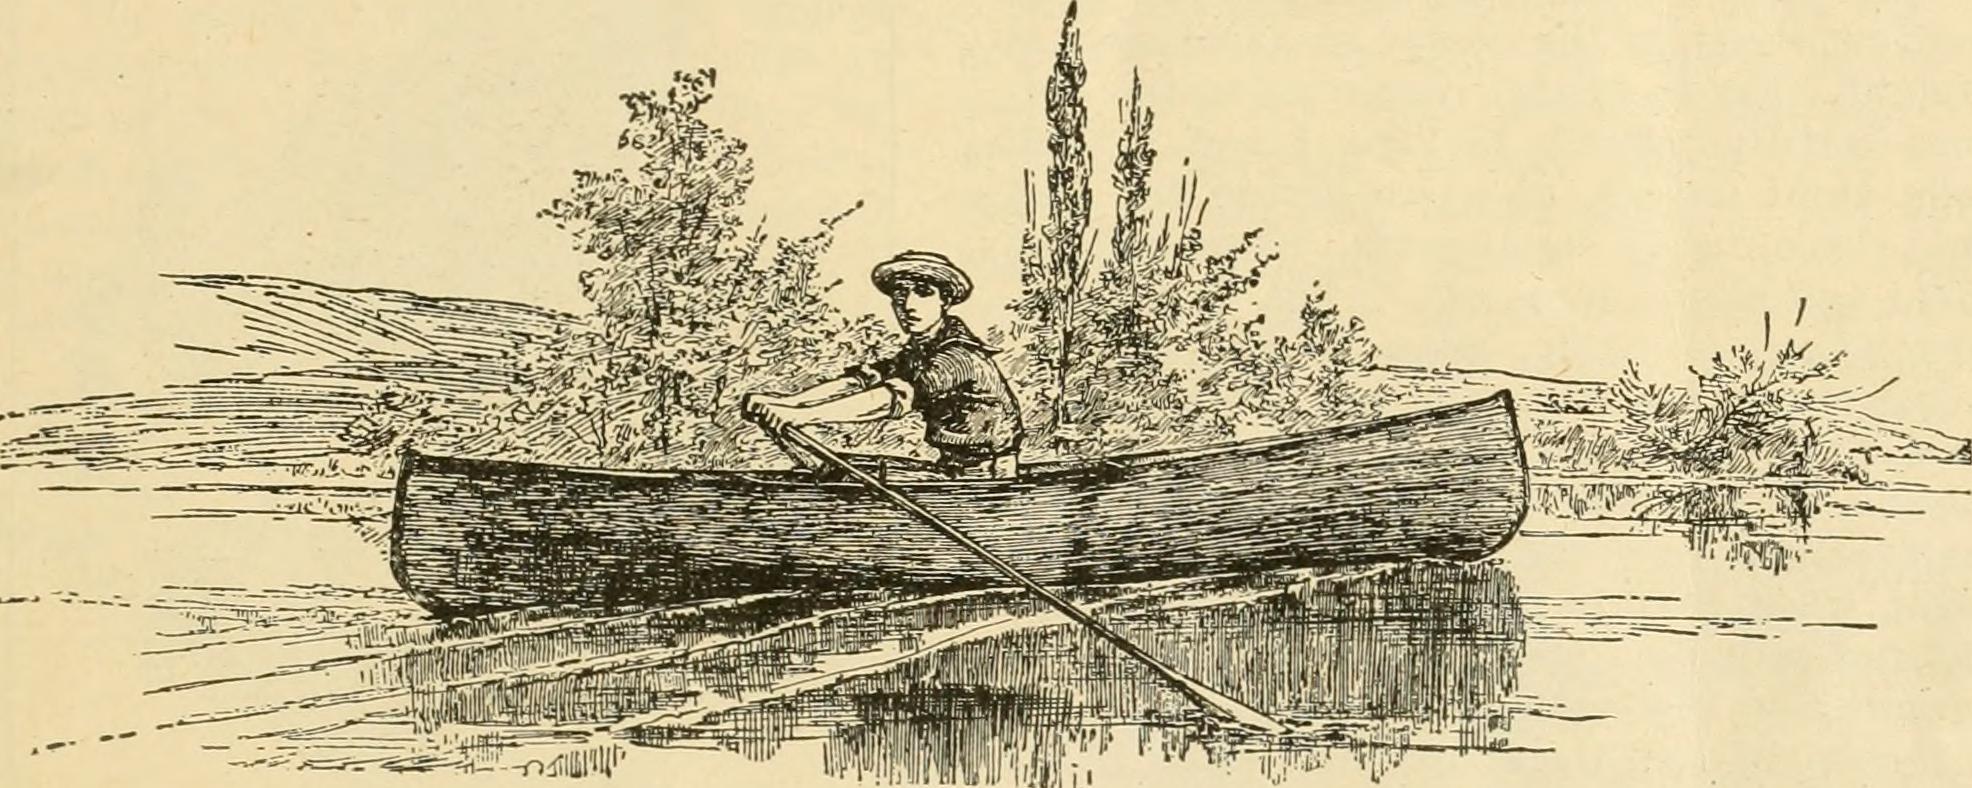 Image from page 4 of "Mechanics for young America; how to build boats, water motors, wind mills, searchlight, electric burglar alarm, ice boat ... Etc.; the directions are plain and complete. Reprinted from Popular mechanics" (1905)